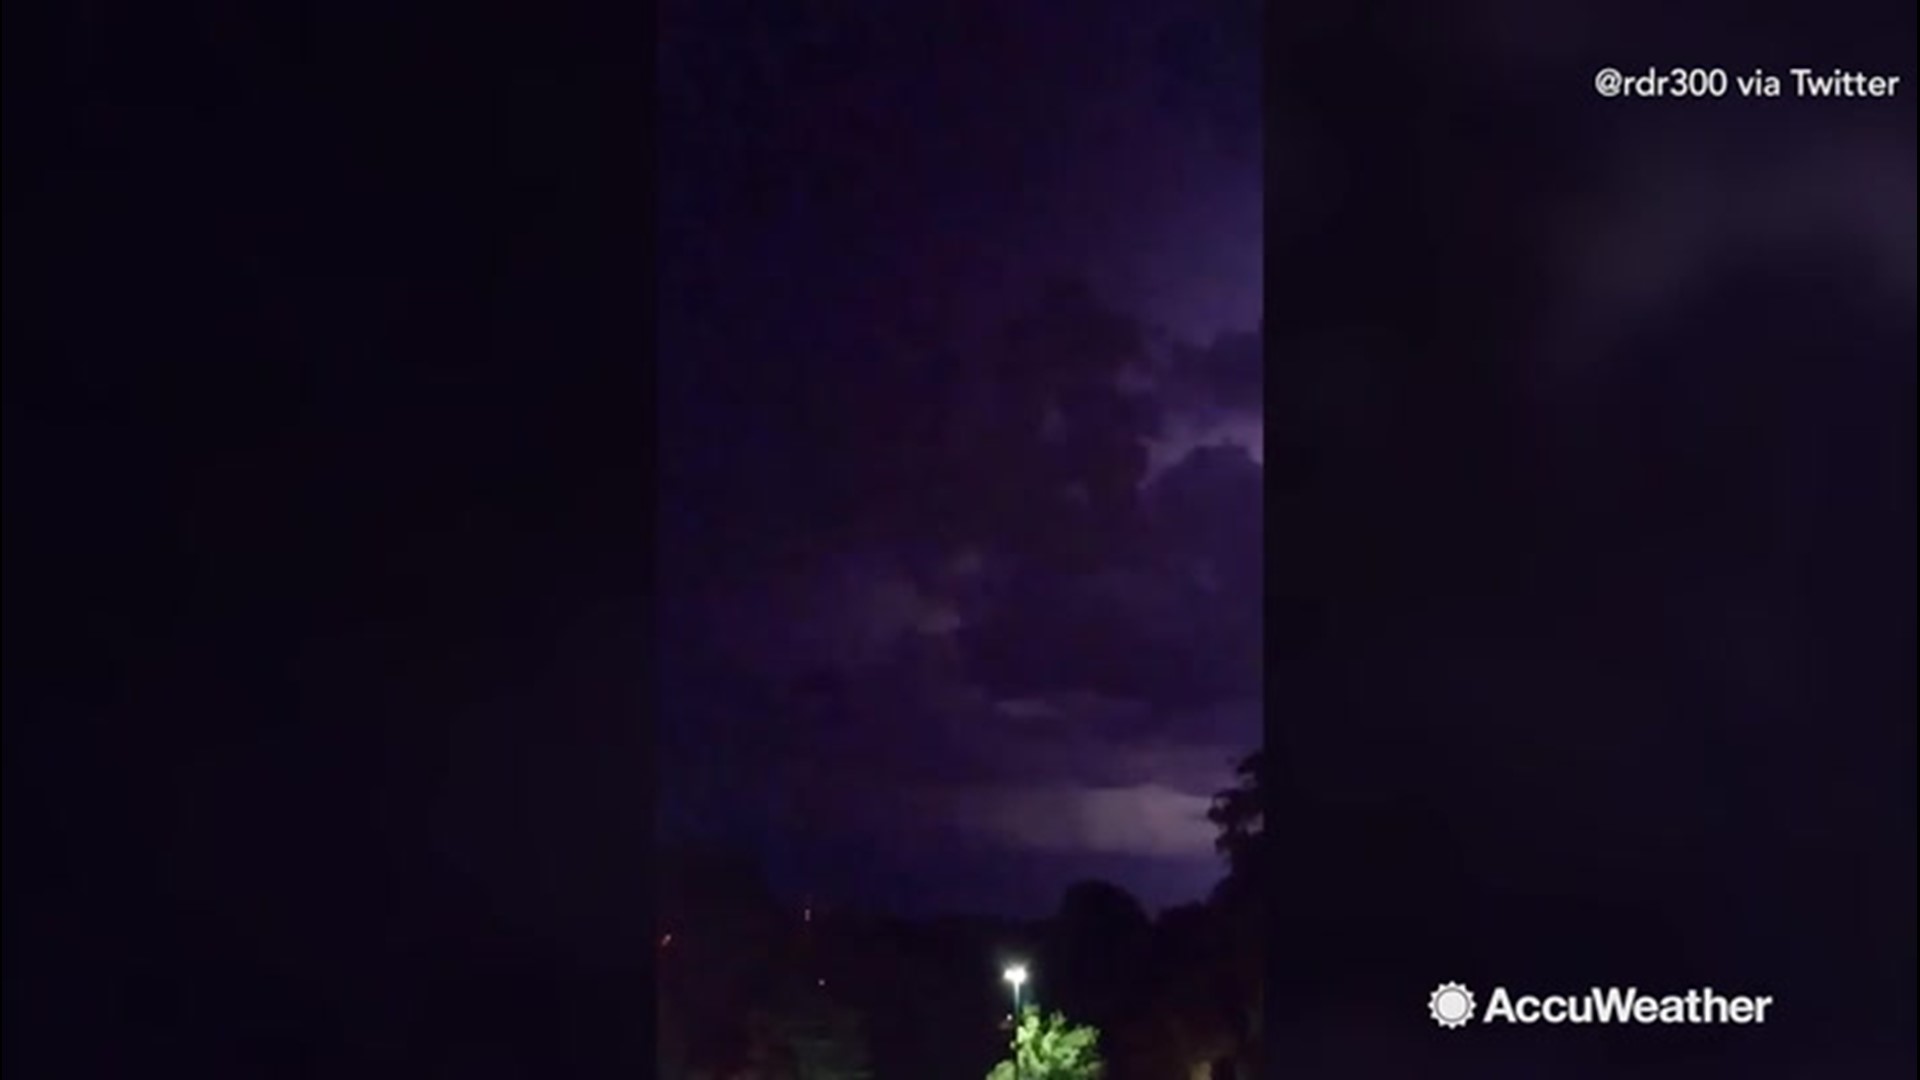 A thunderstorm approached the city of Lincoln, Nebraska, on June, 14 with a lot of lightning. While the storm may not have been wanted, it did create a beautiful night sky.